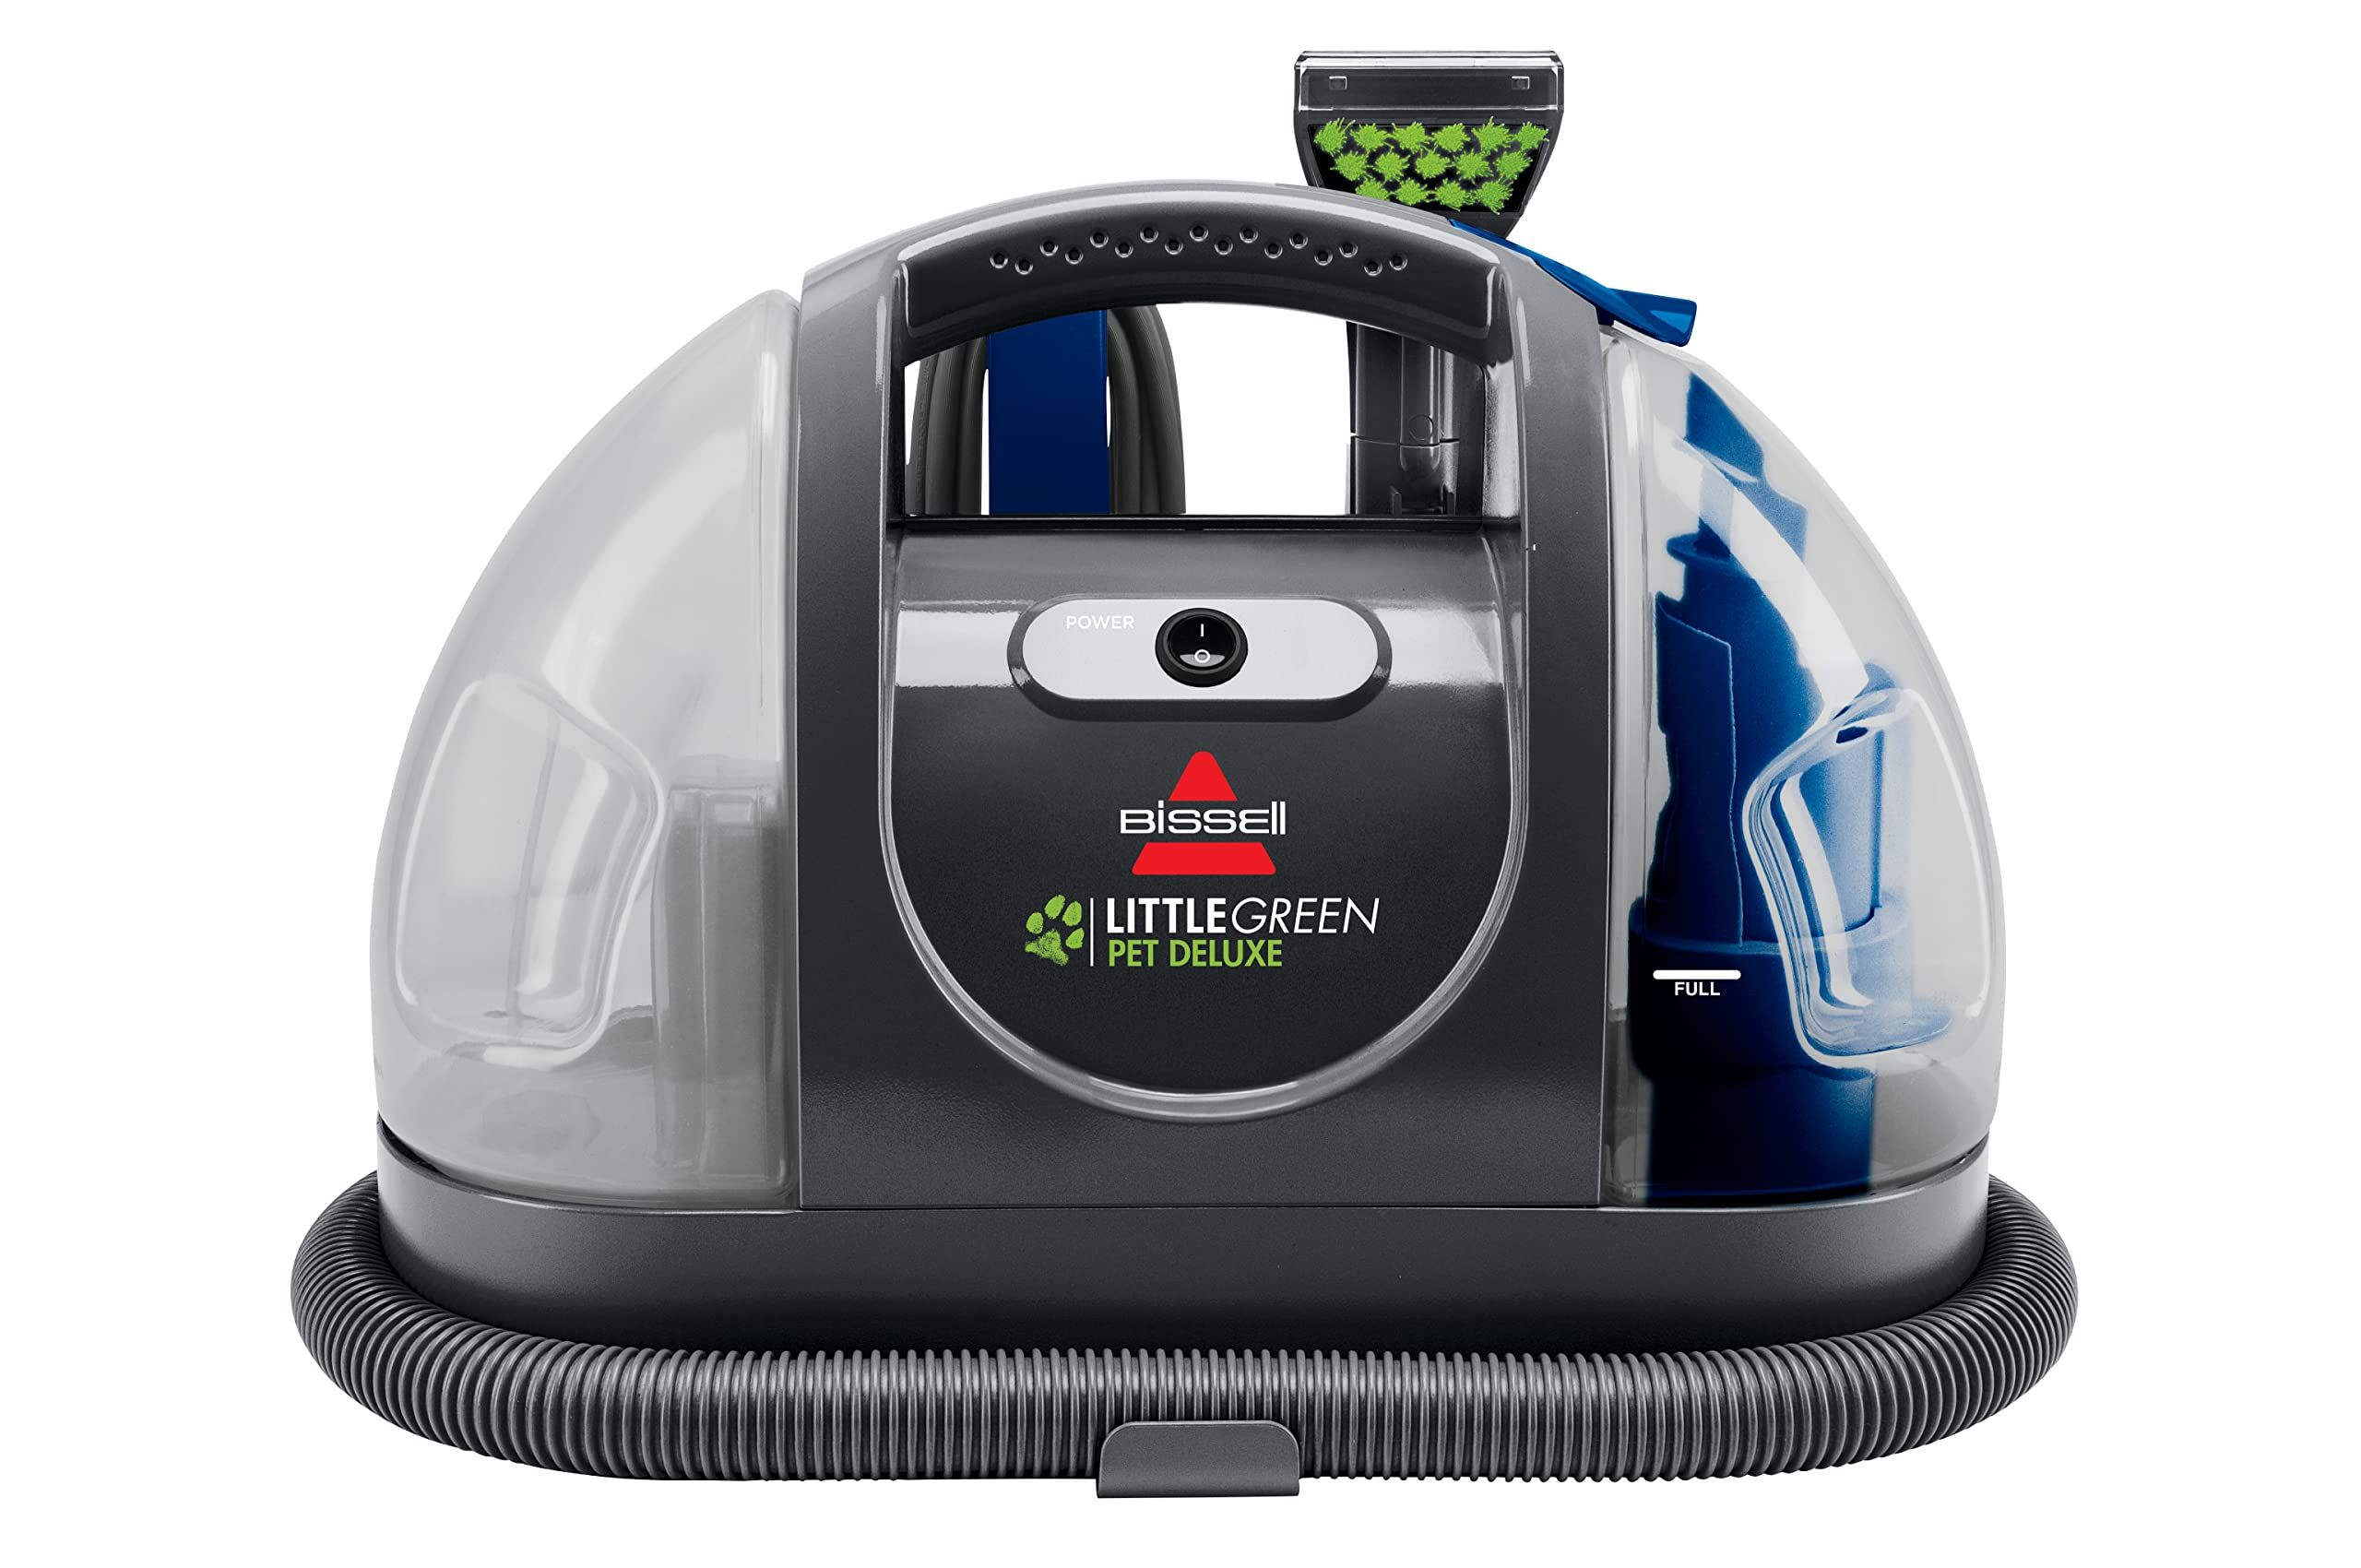 Bissell Little Green Pet Deluxe Portable Carpet Cleaner, 3353, Large, Gray/Blue | Amazon (US)